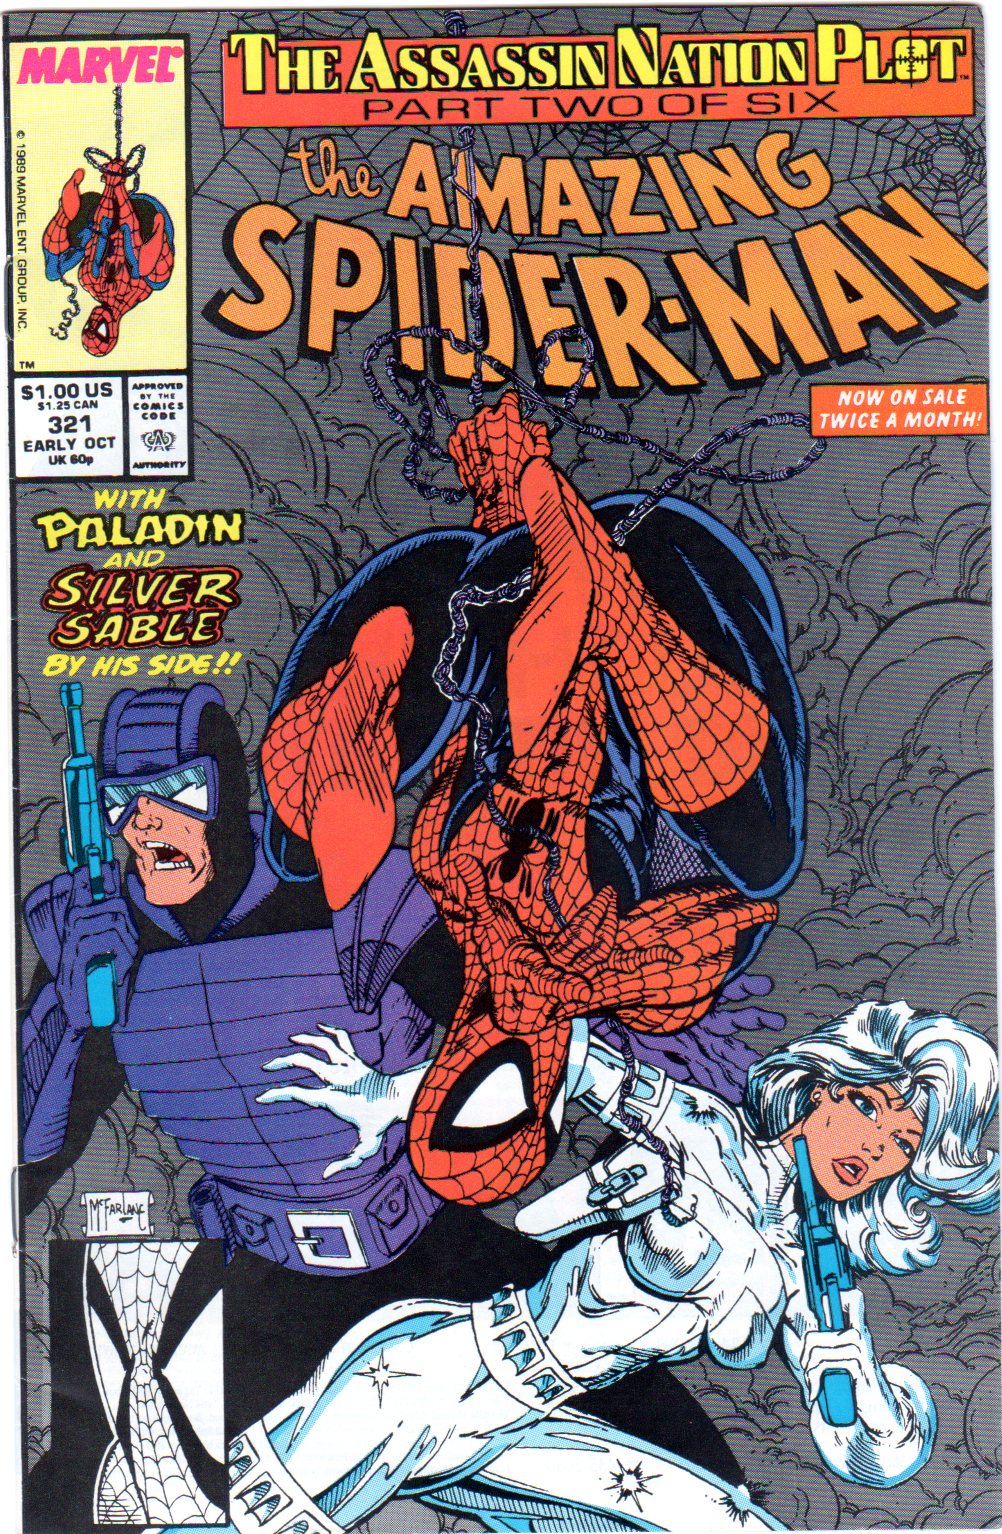 Remembrance of Comics Past: Amazing Spider-Man #321